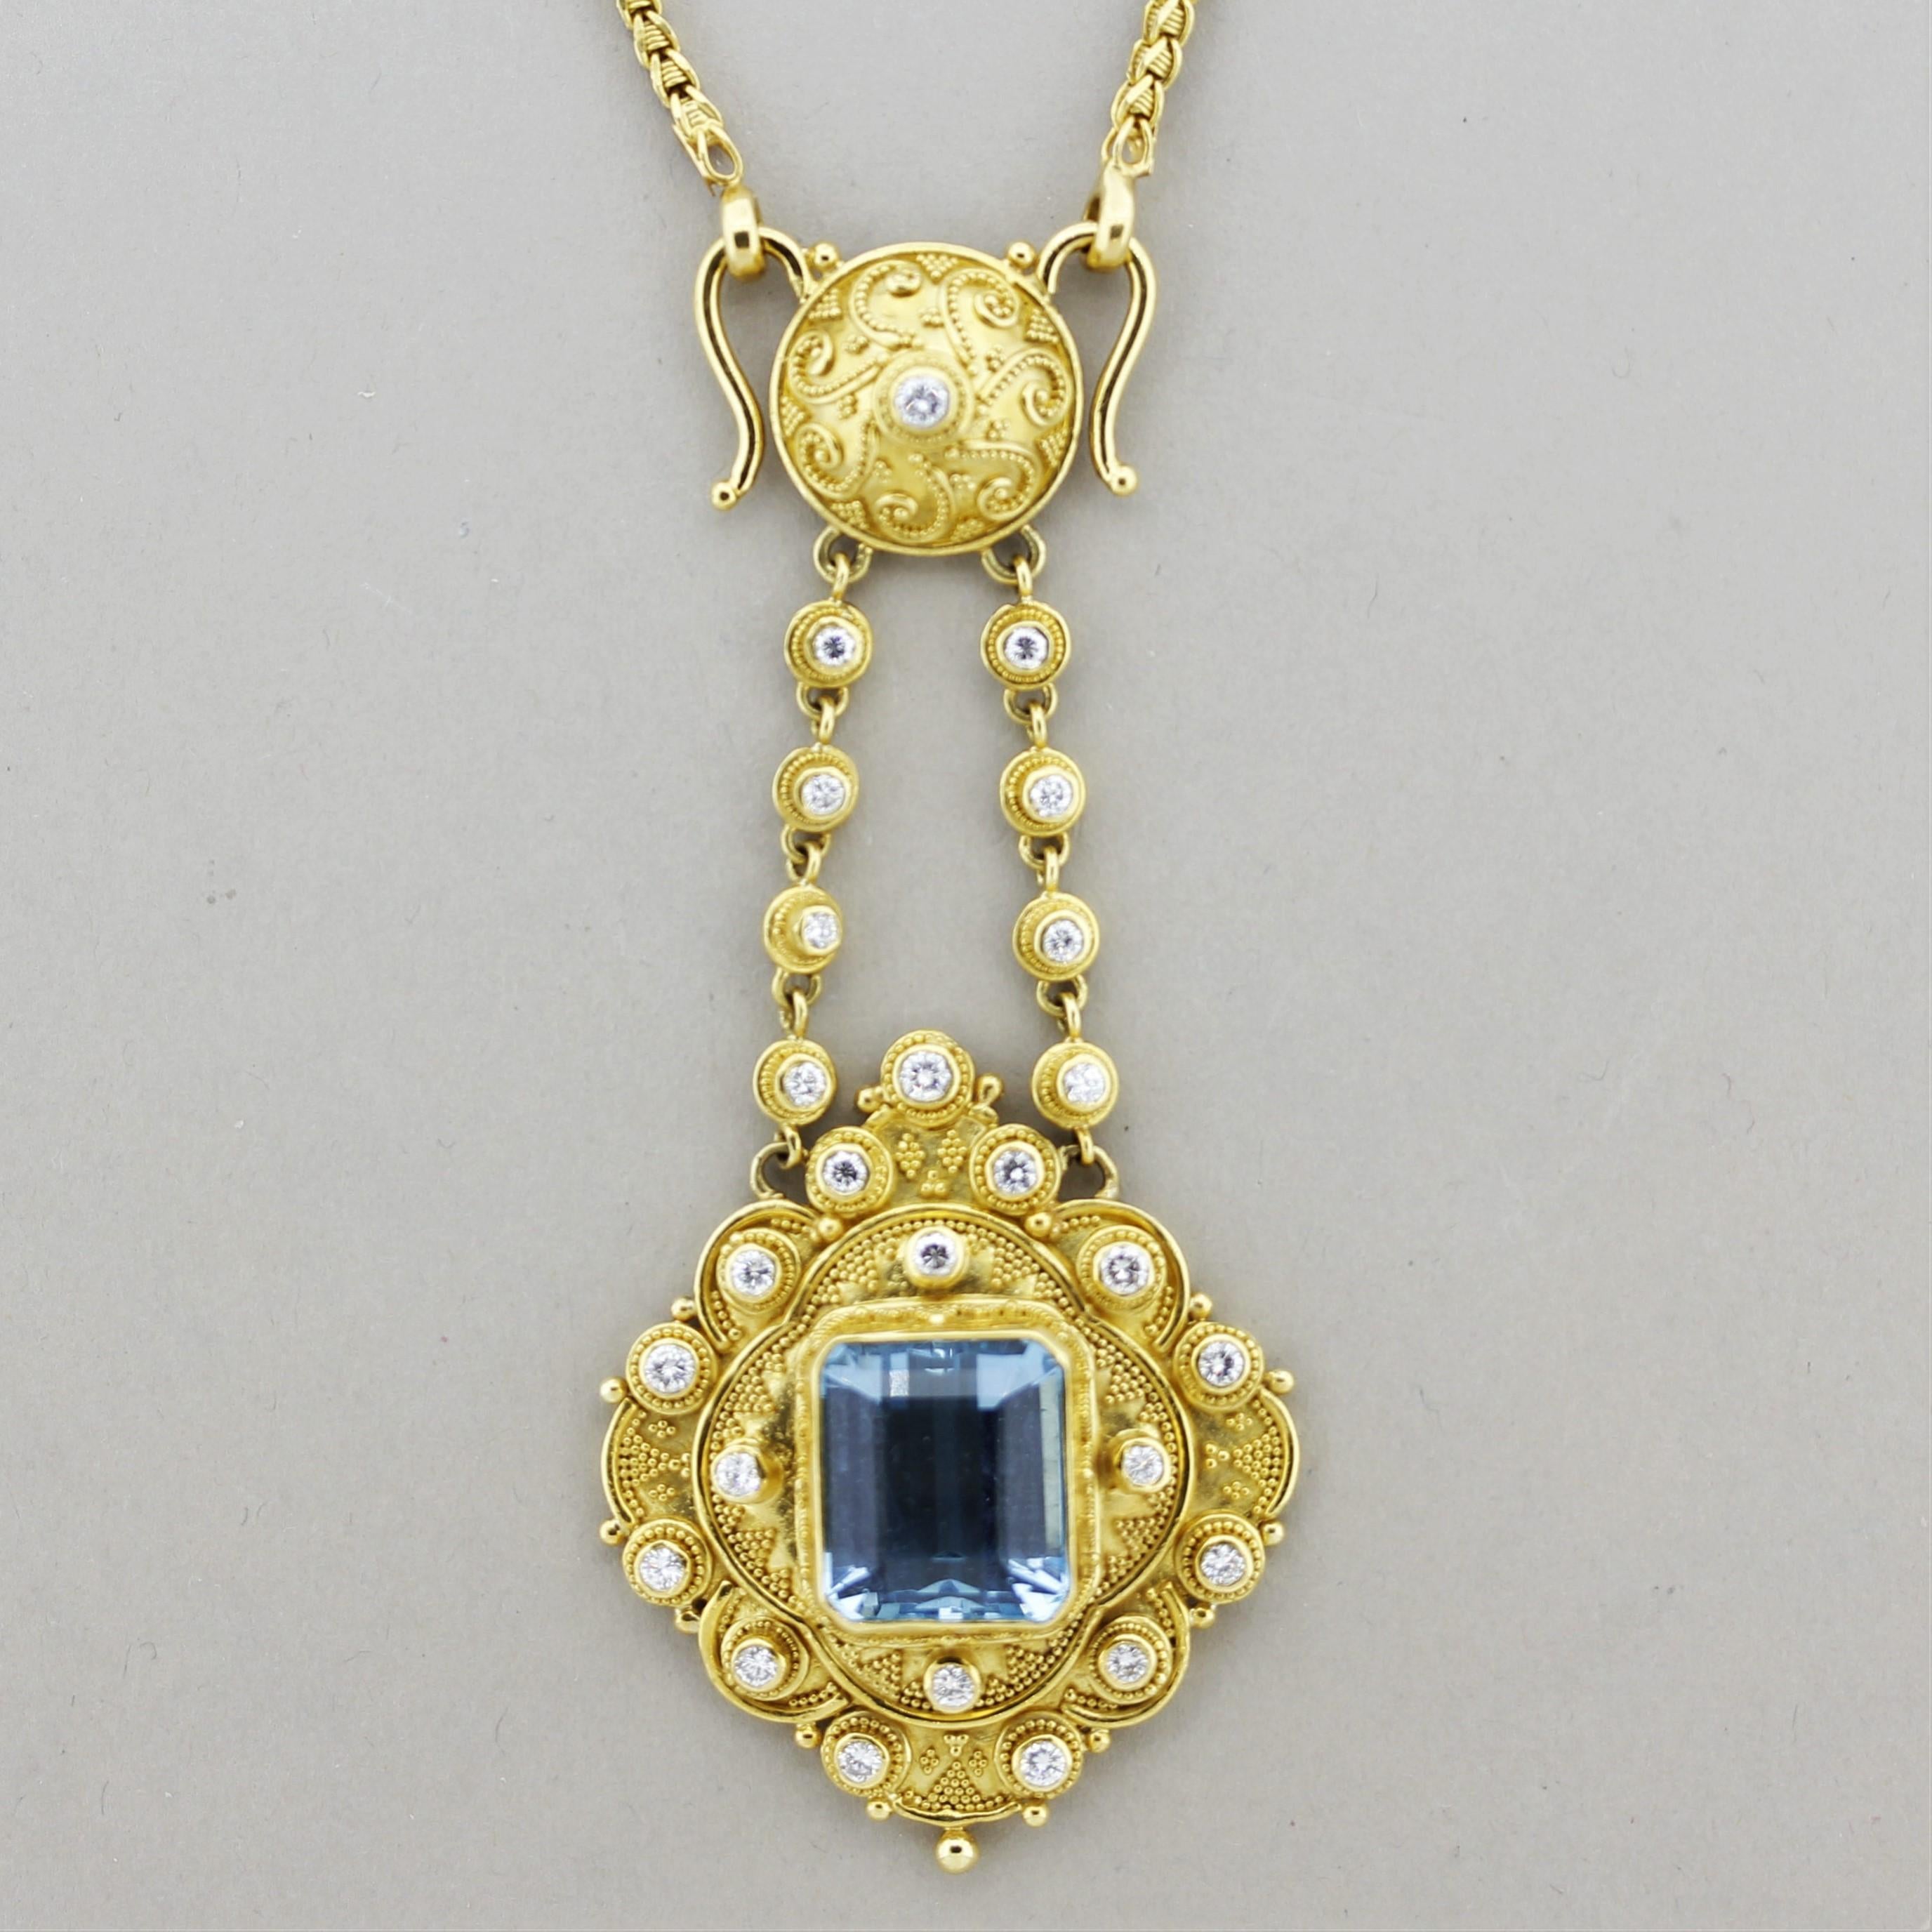 An original pendant by Luna Felix, known for ancient styled and made jewelry since 1969. This lovely piece features a large rectangular aquamarine weighing 15 carats which has an ideal sea-blue color. It is complemented by 2 carats of round